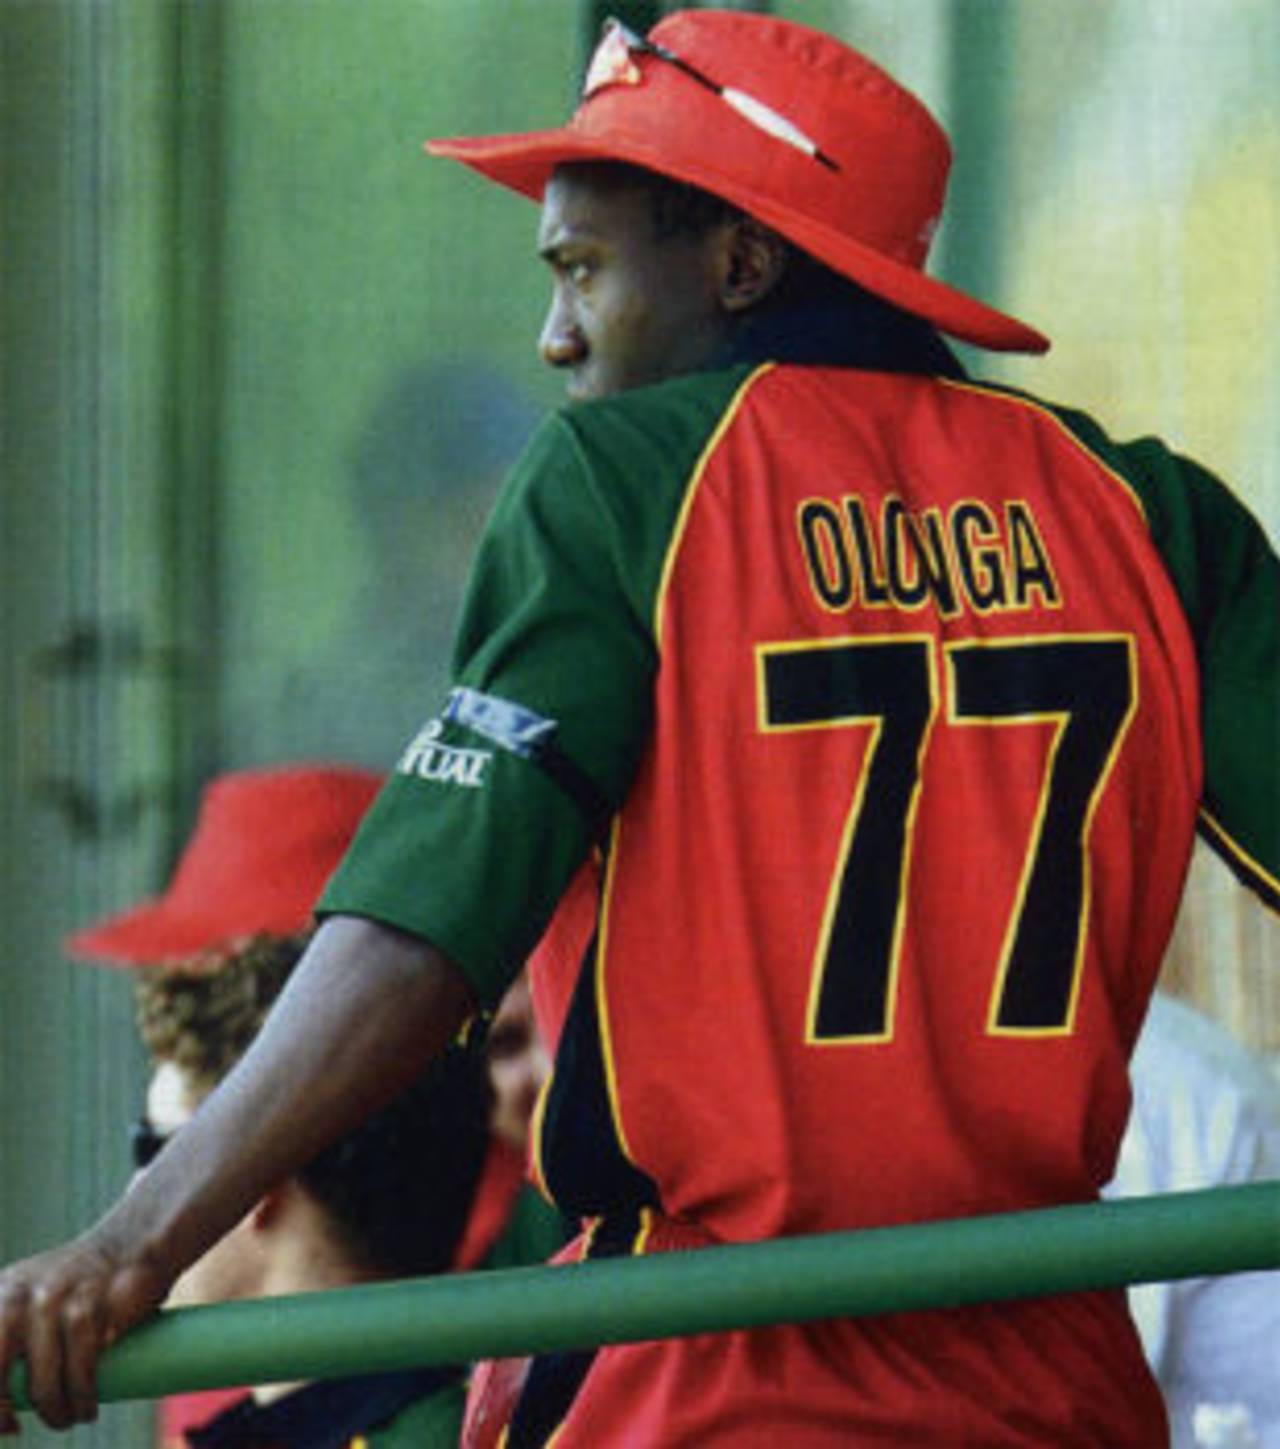 Henry Olonga: "Maybe it's time now to consider bringing Zimbabwe out of isolation from a broader perspective"&nbsp;&nbsp;&bull;&nbsp;&nbsp;Reuters